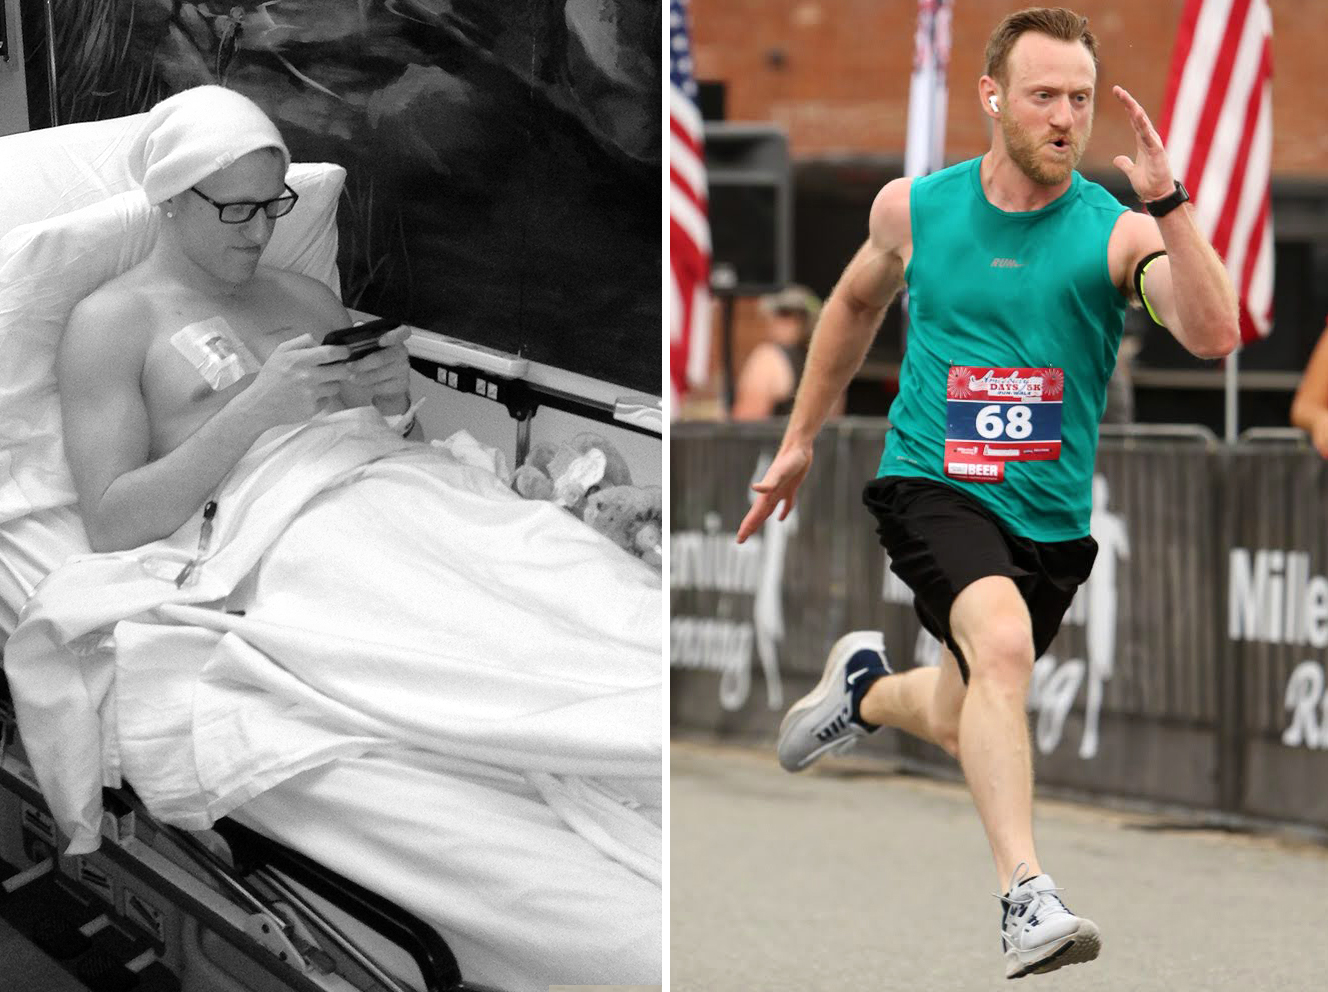 All Grown Up: Former Pediatric Patient Runs Boston Marathon to Give Back to MGfC